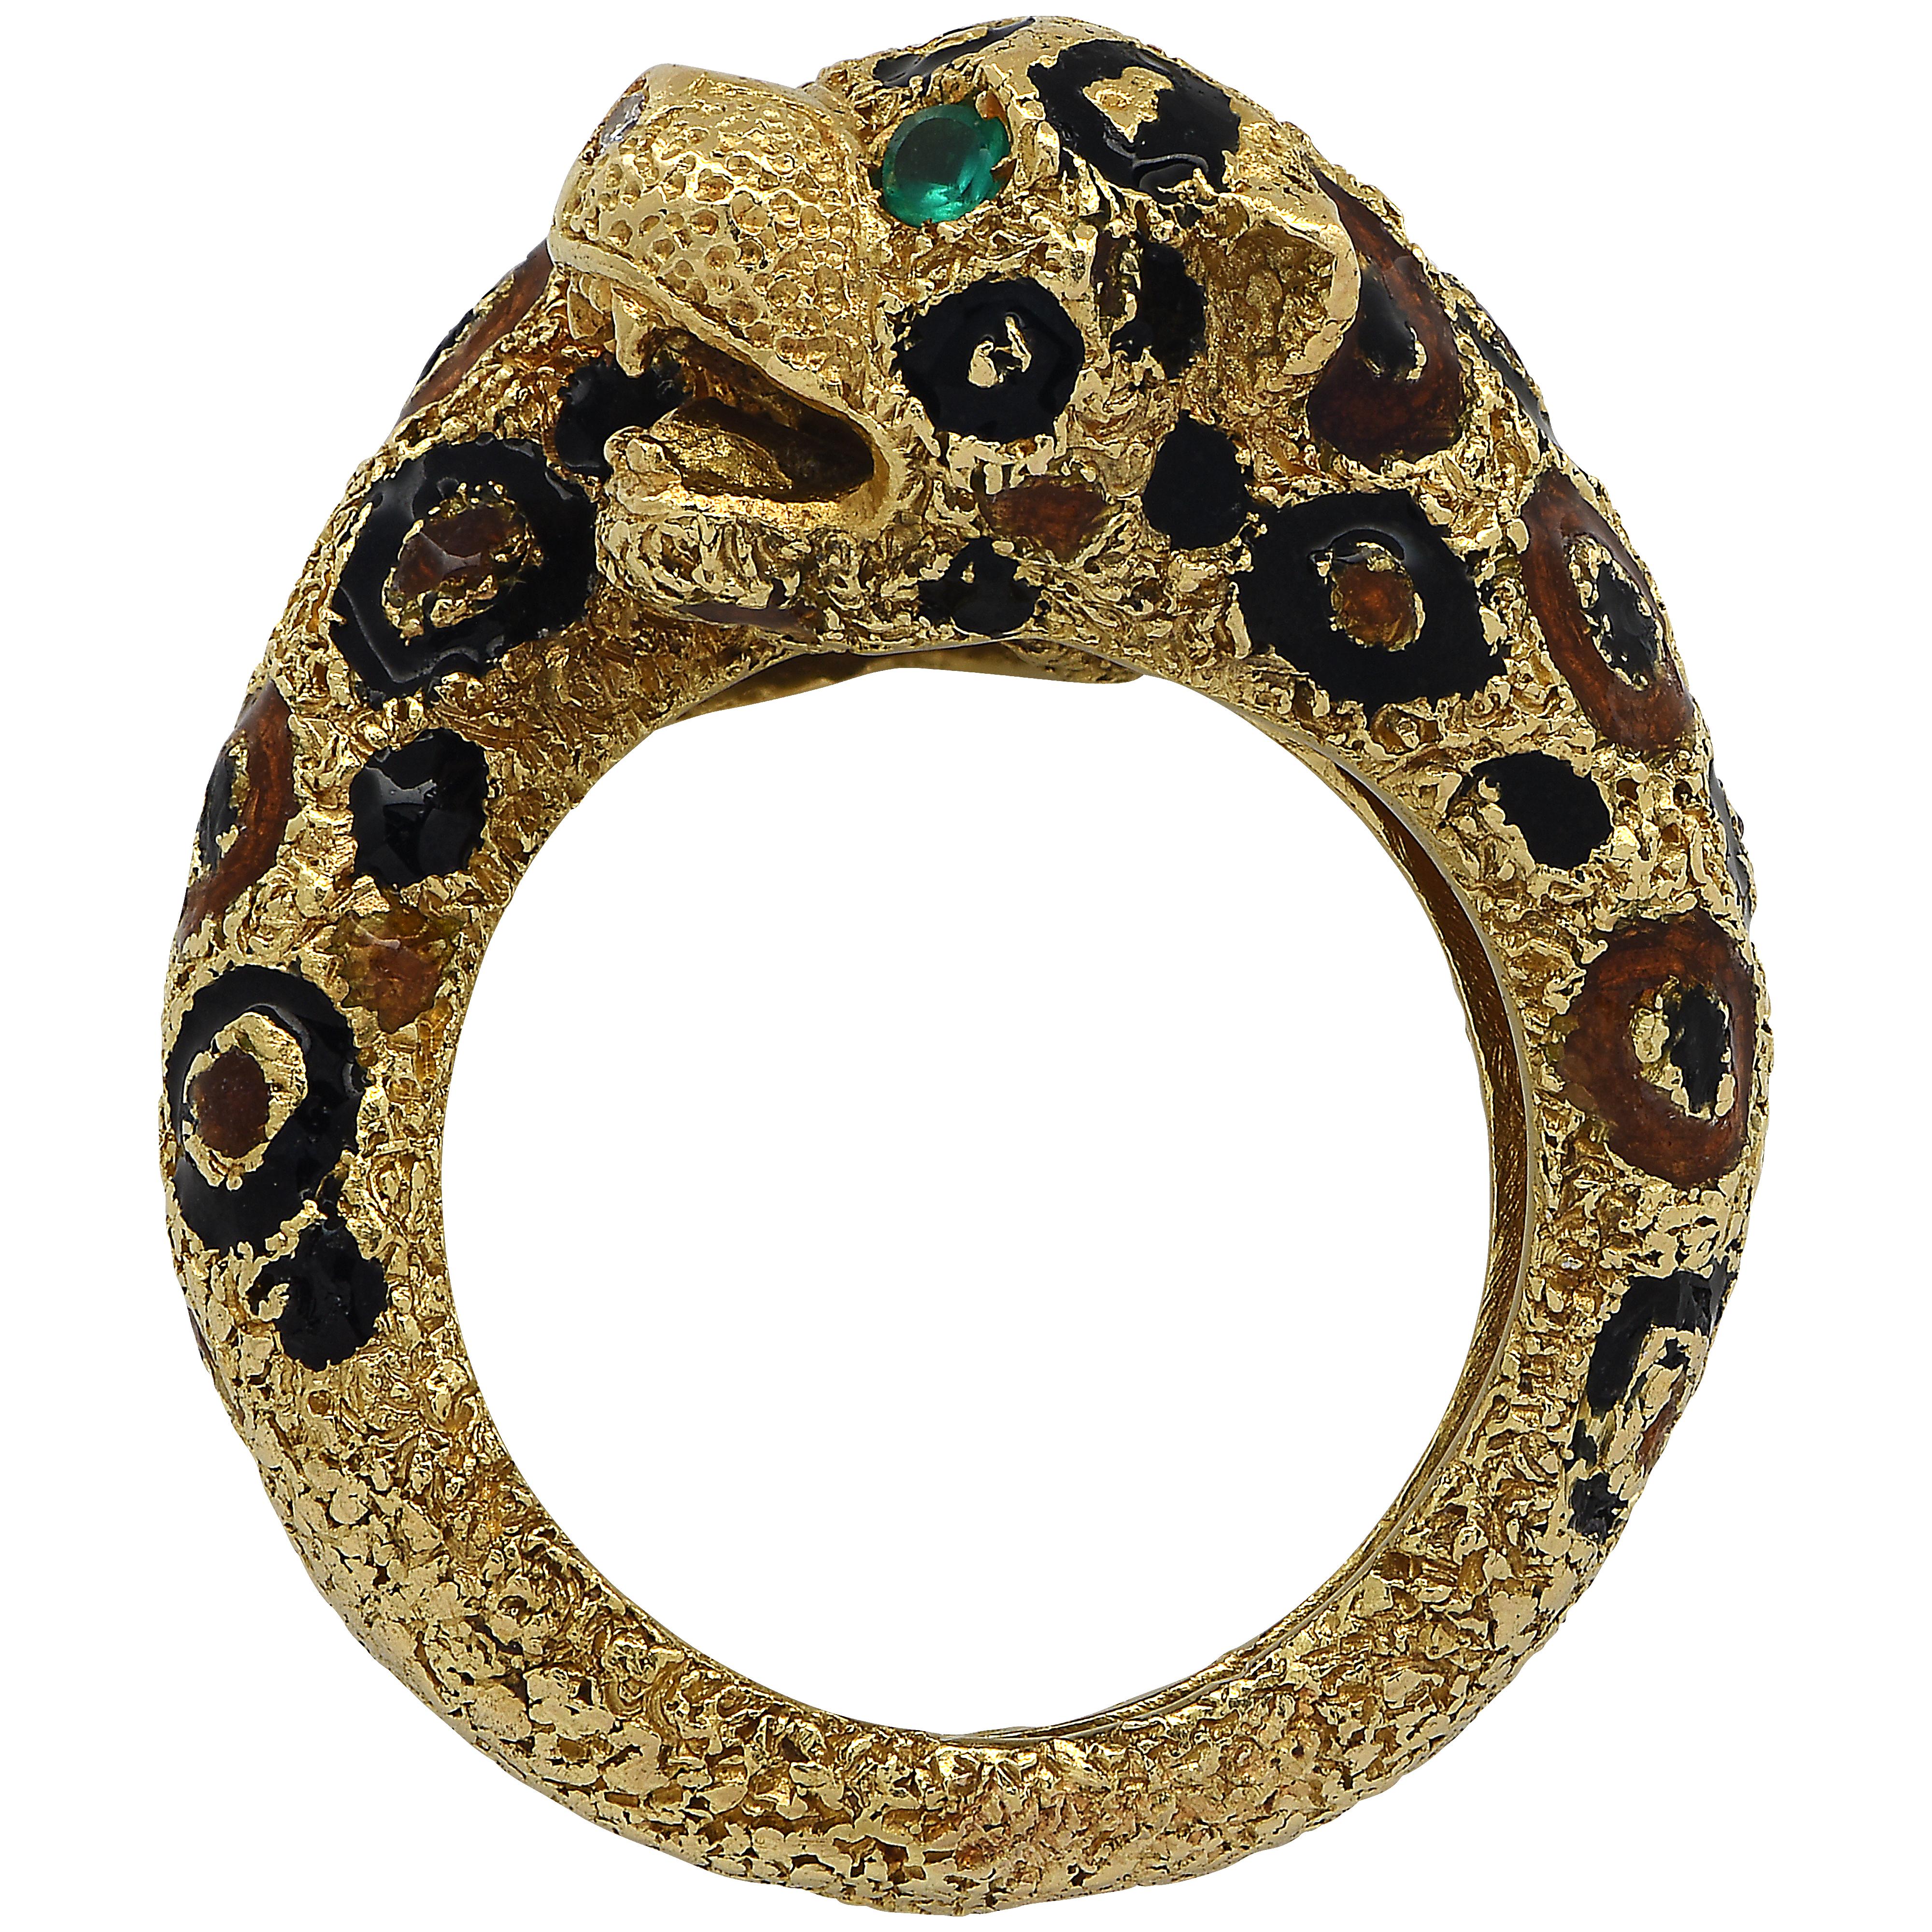 Captivating cross over ring crafted in 18 karat yellow gold, featuring two leopard heads accented with green emerald eyes and black and brown enamel spots. This unique ring is a size 6.75 and weight 19.12 grams. It measures 21.5 mm at its widest